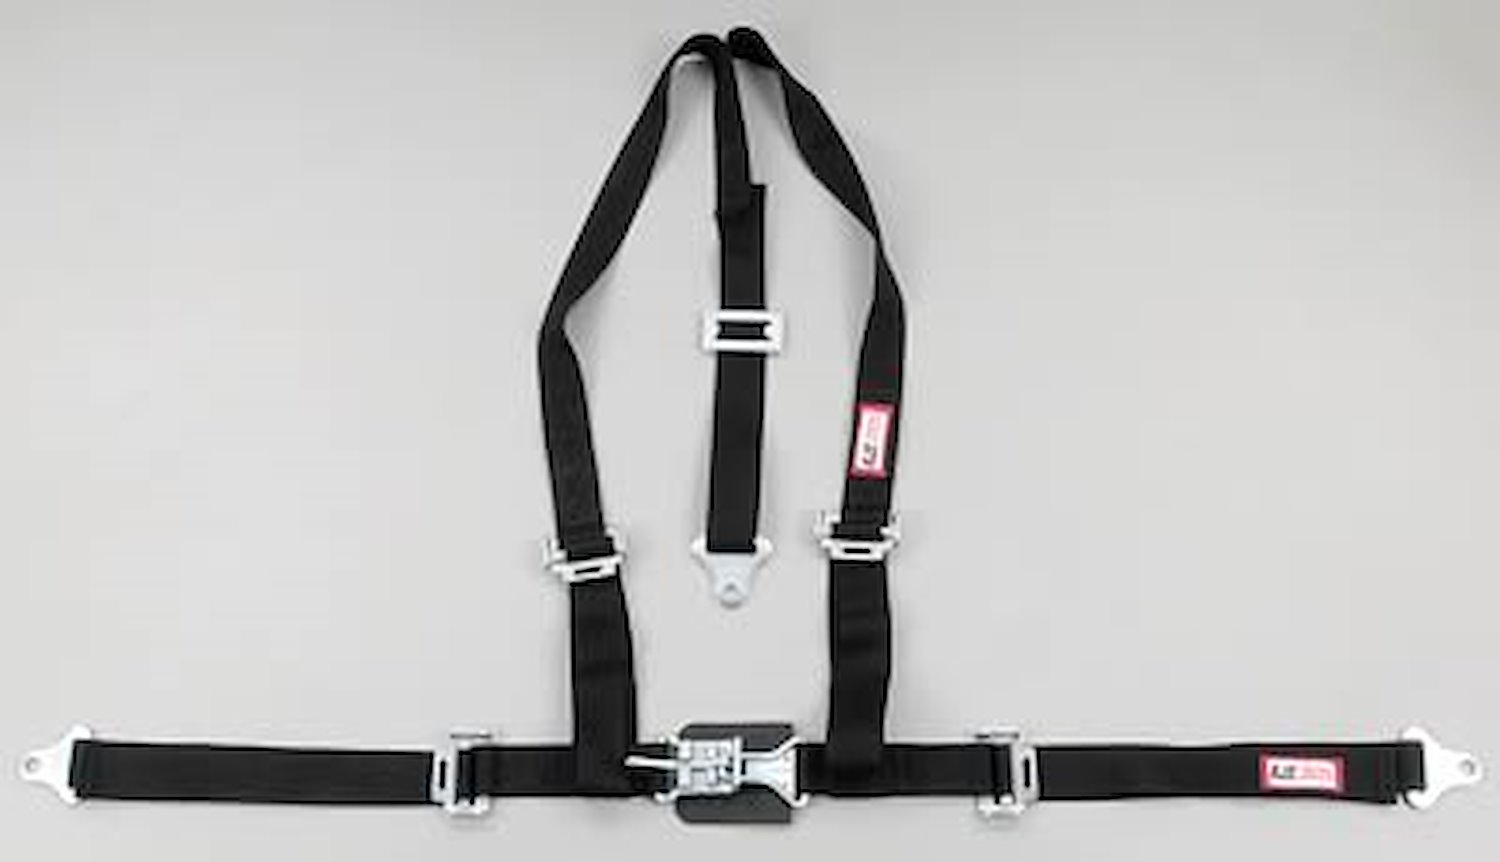 NON-SFI L&L HARNESS 2 PULL DOWN Lap Belt SNAP SEWN IN 2 S.H. Individual ROLL BAR Mount w/STERNUM STRAP WRAP/SNAP RED